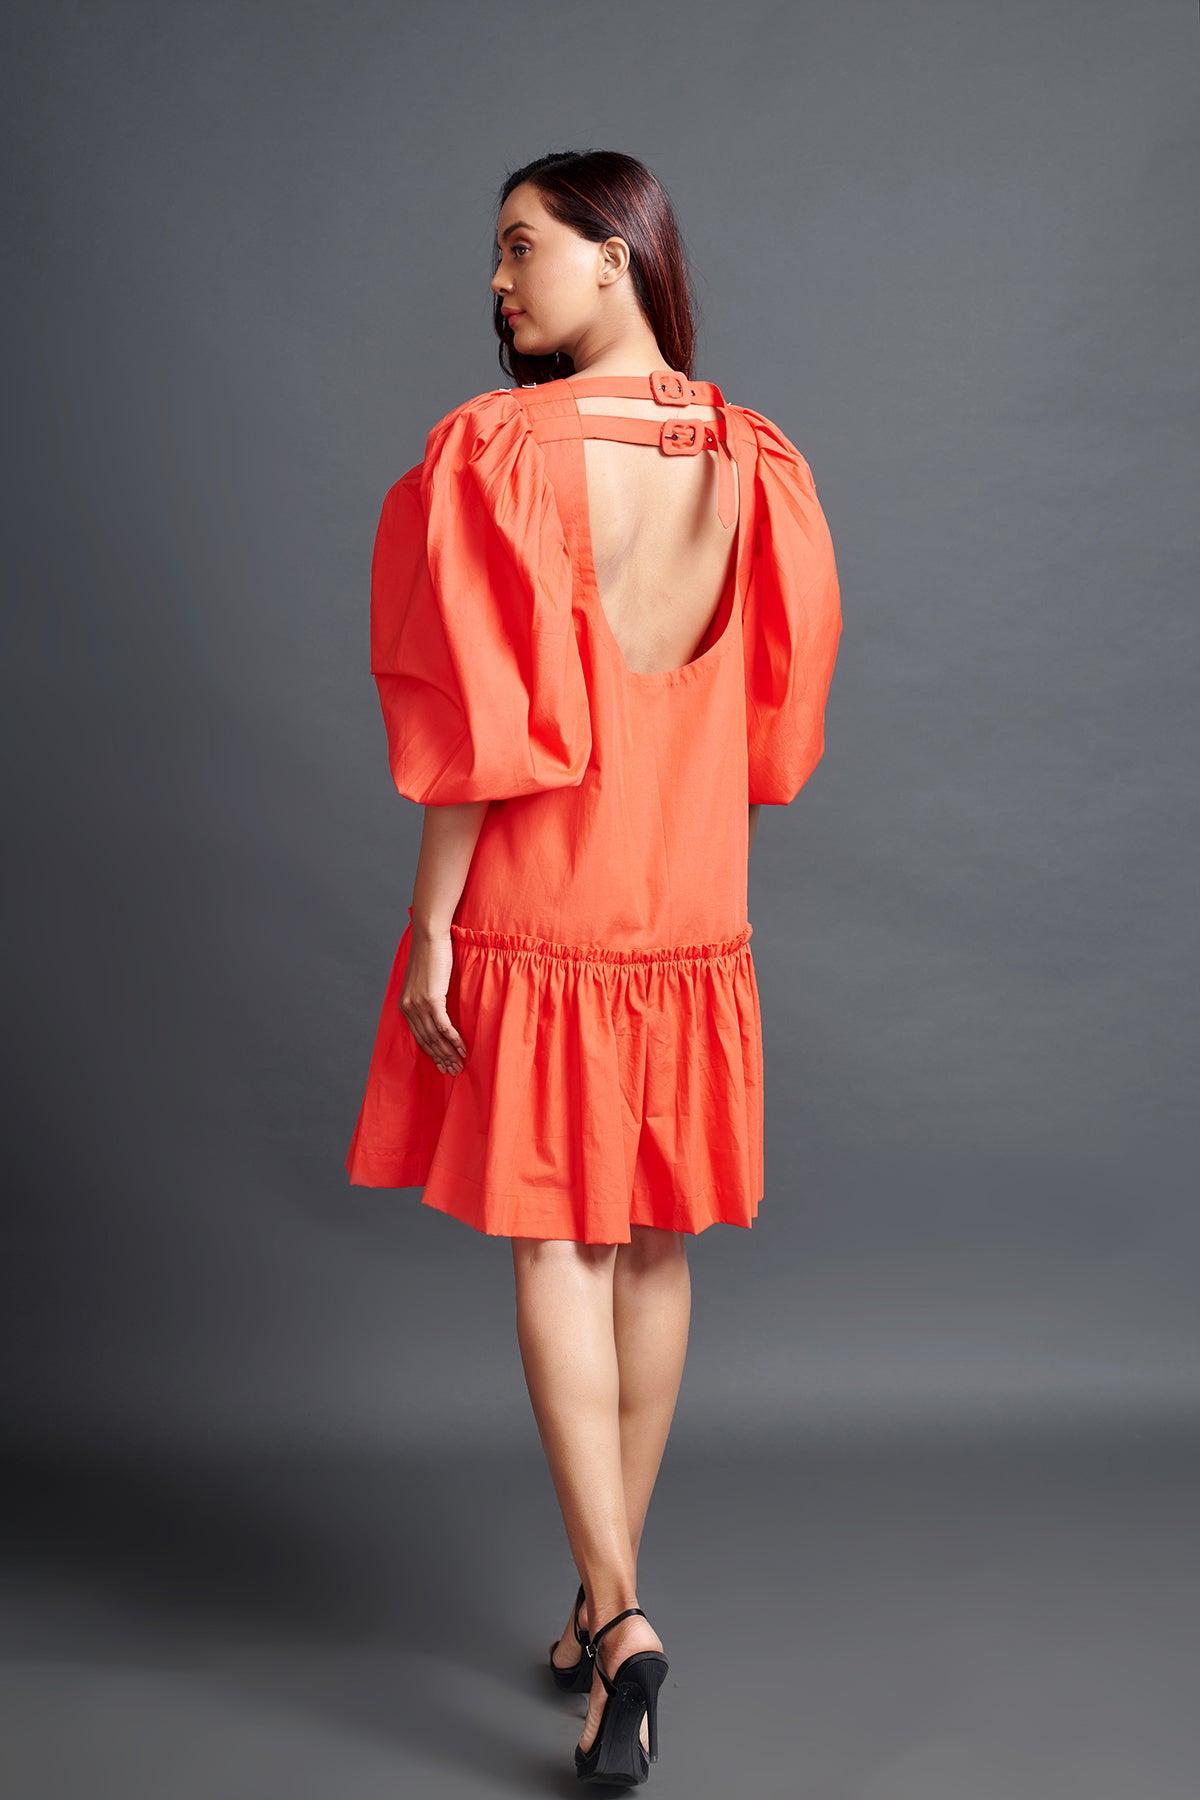 Image of ORANGE GATHERED BACKLESS DRESS IN COTTON BASE WITH CUTWORK EMBROIDERY. From savoirfashions.com